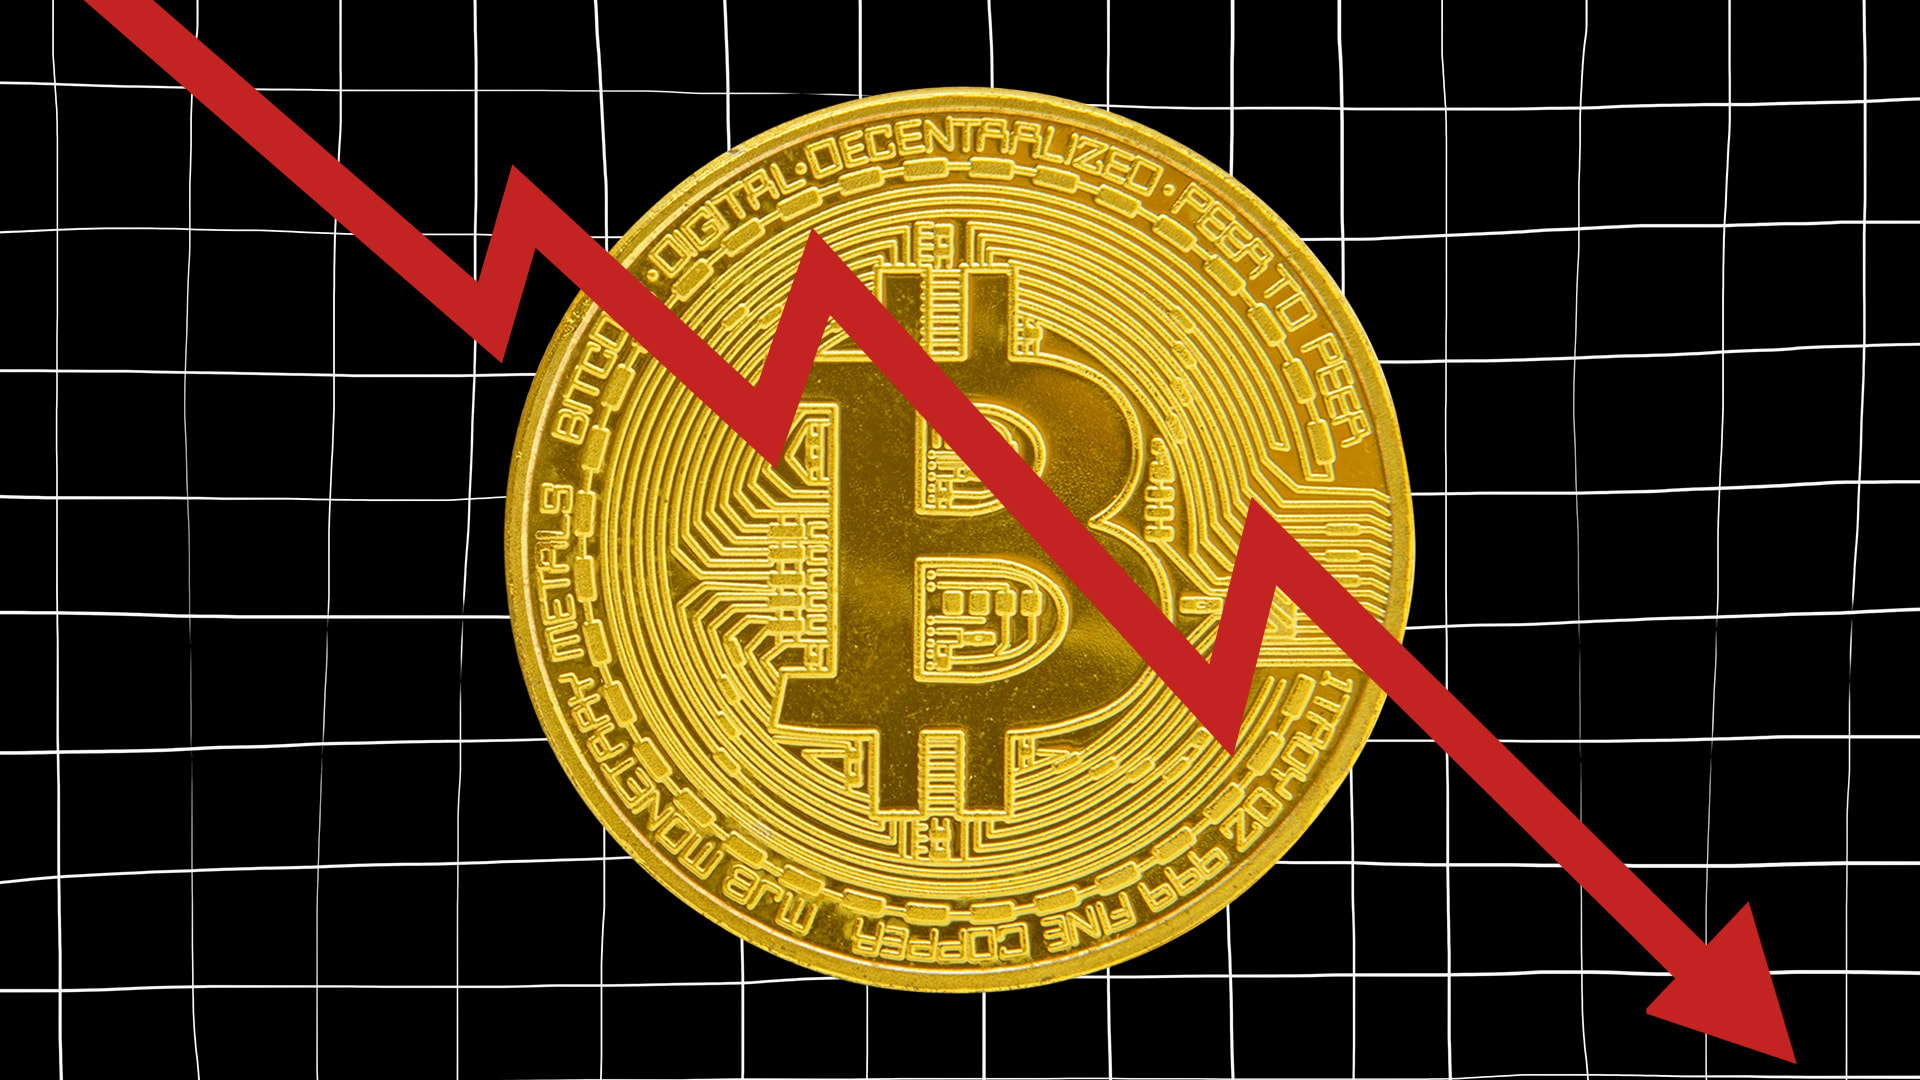 Why is bitcoin crashing again? Japan’s comments bring BTC down almost 8%